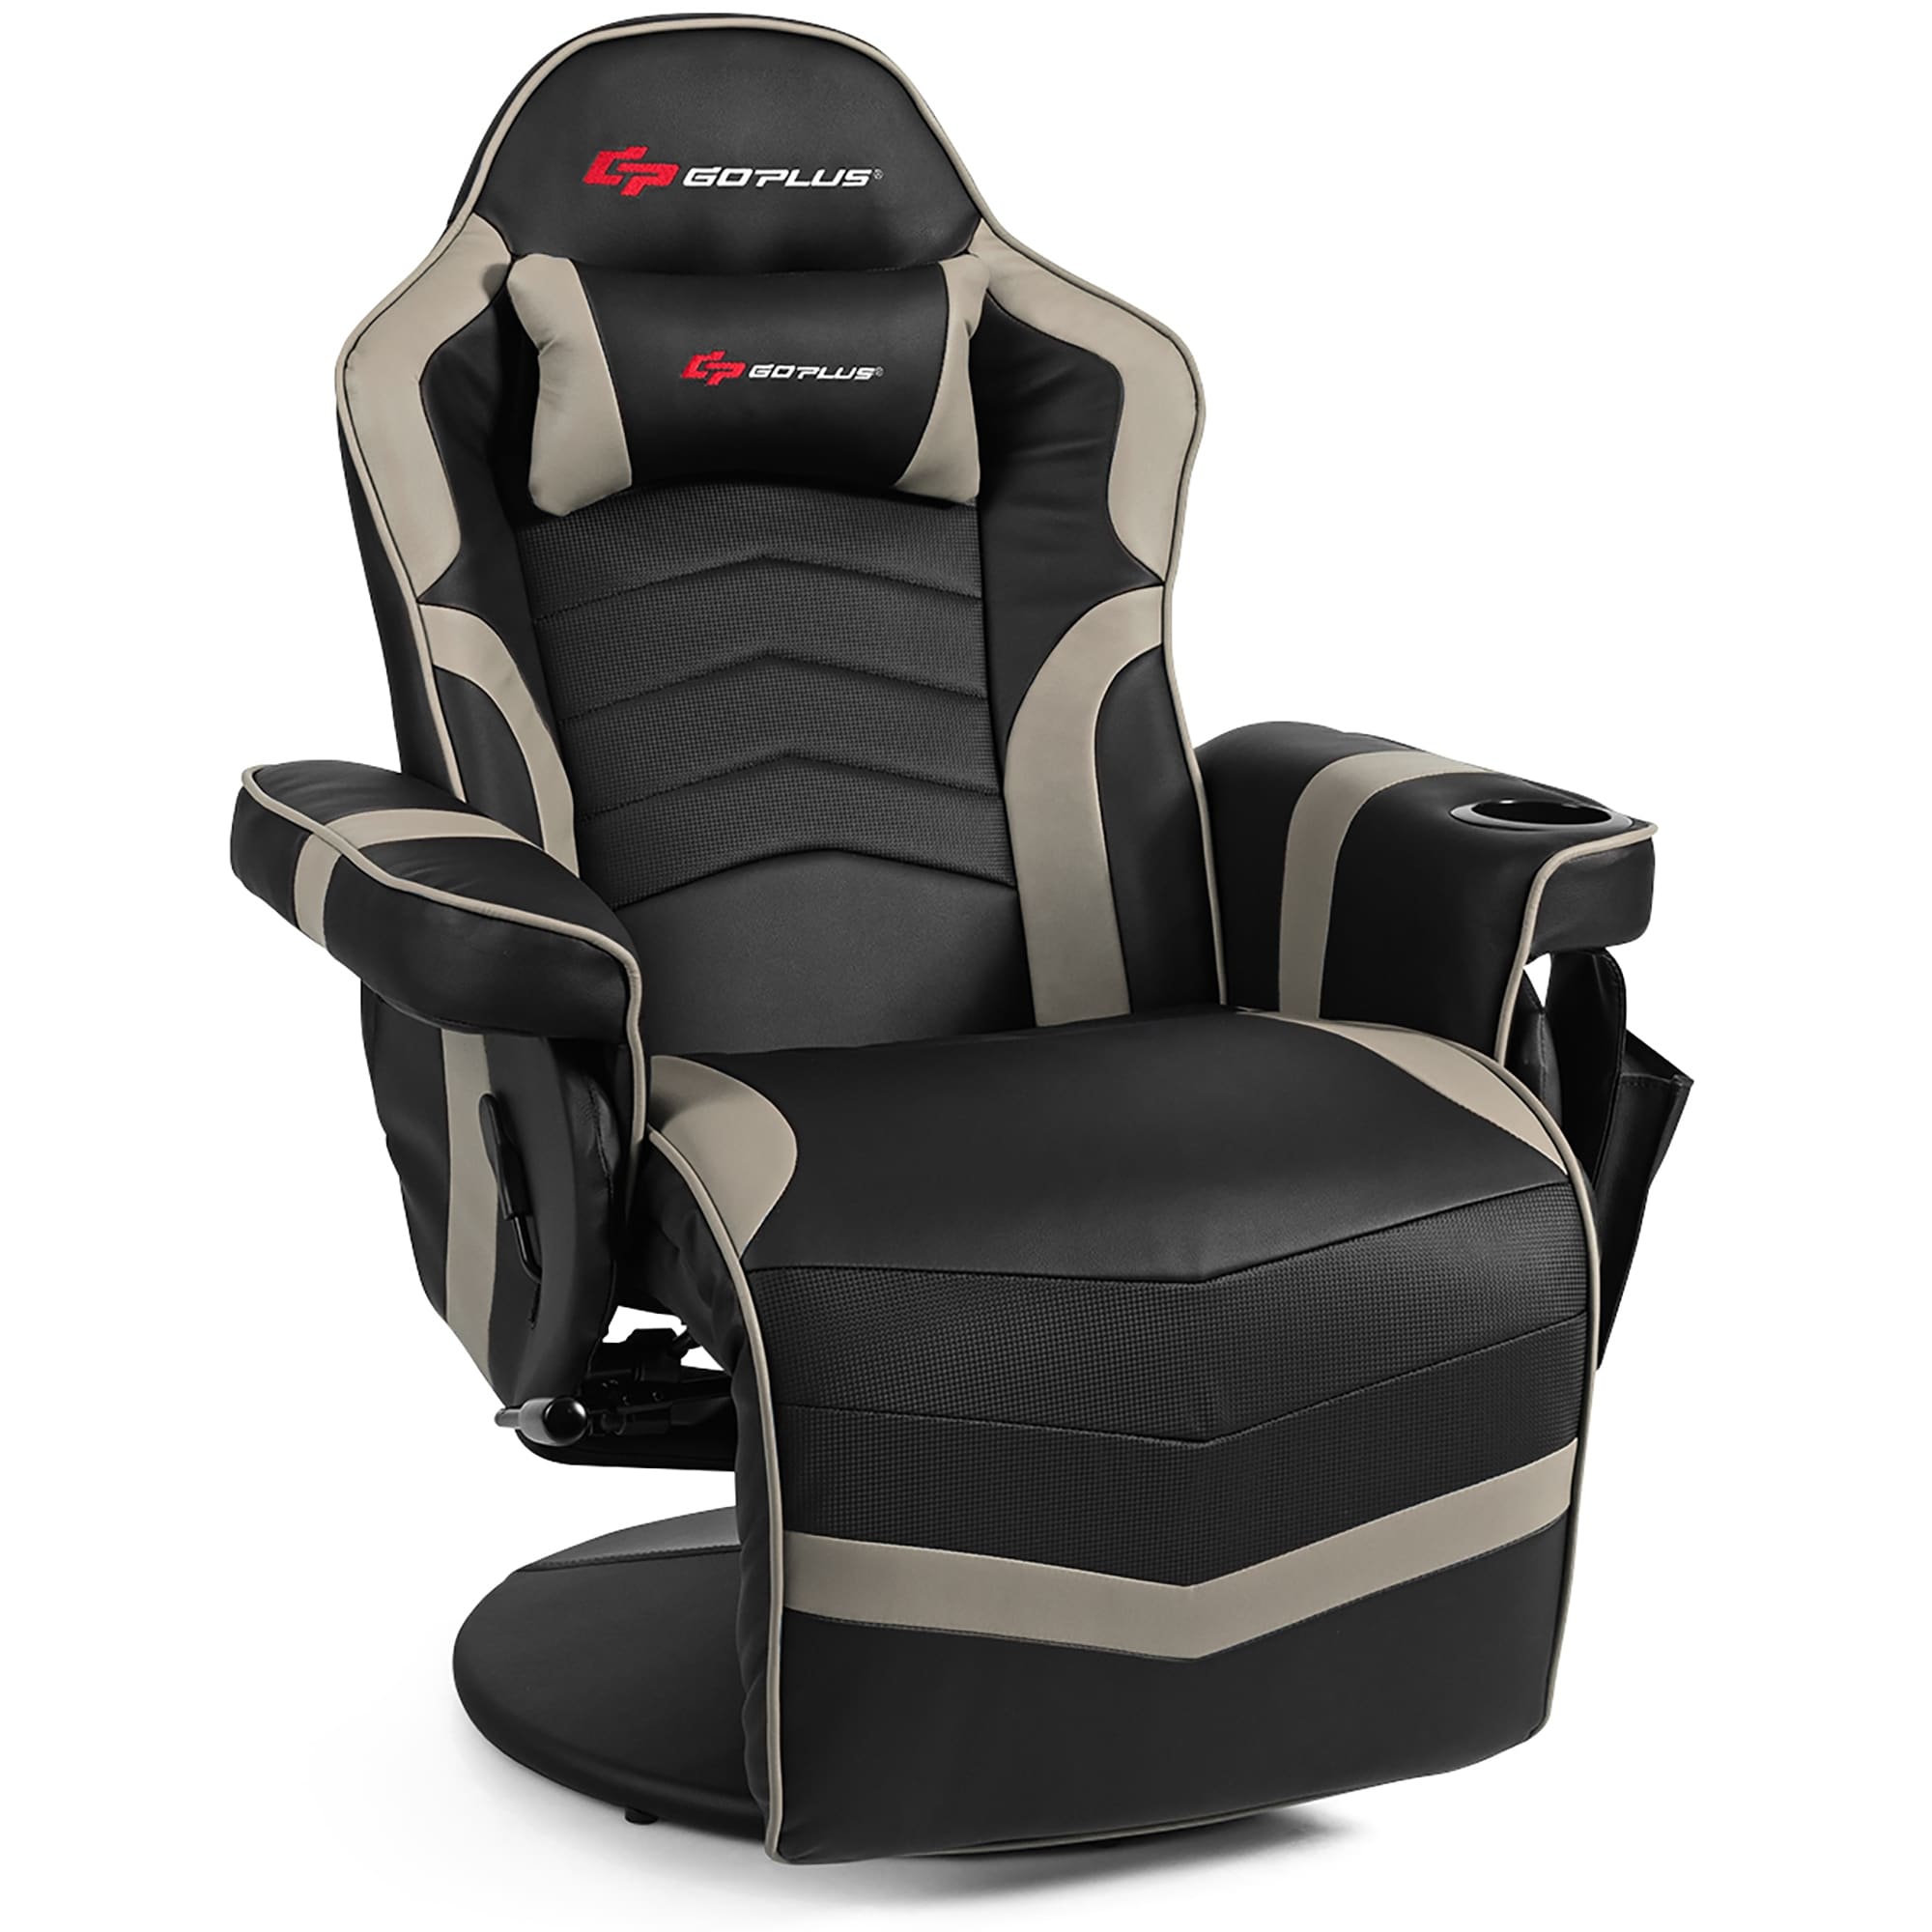 https://ak1.ostkcdn.com/images/products/is/images/direct/775cb885a83c2ac46bc4f0e499a3d680198e4ccd/Massage-Gaming-Chair-Racing-Style-Gaming-Recliner.jpg